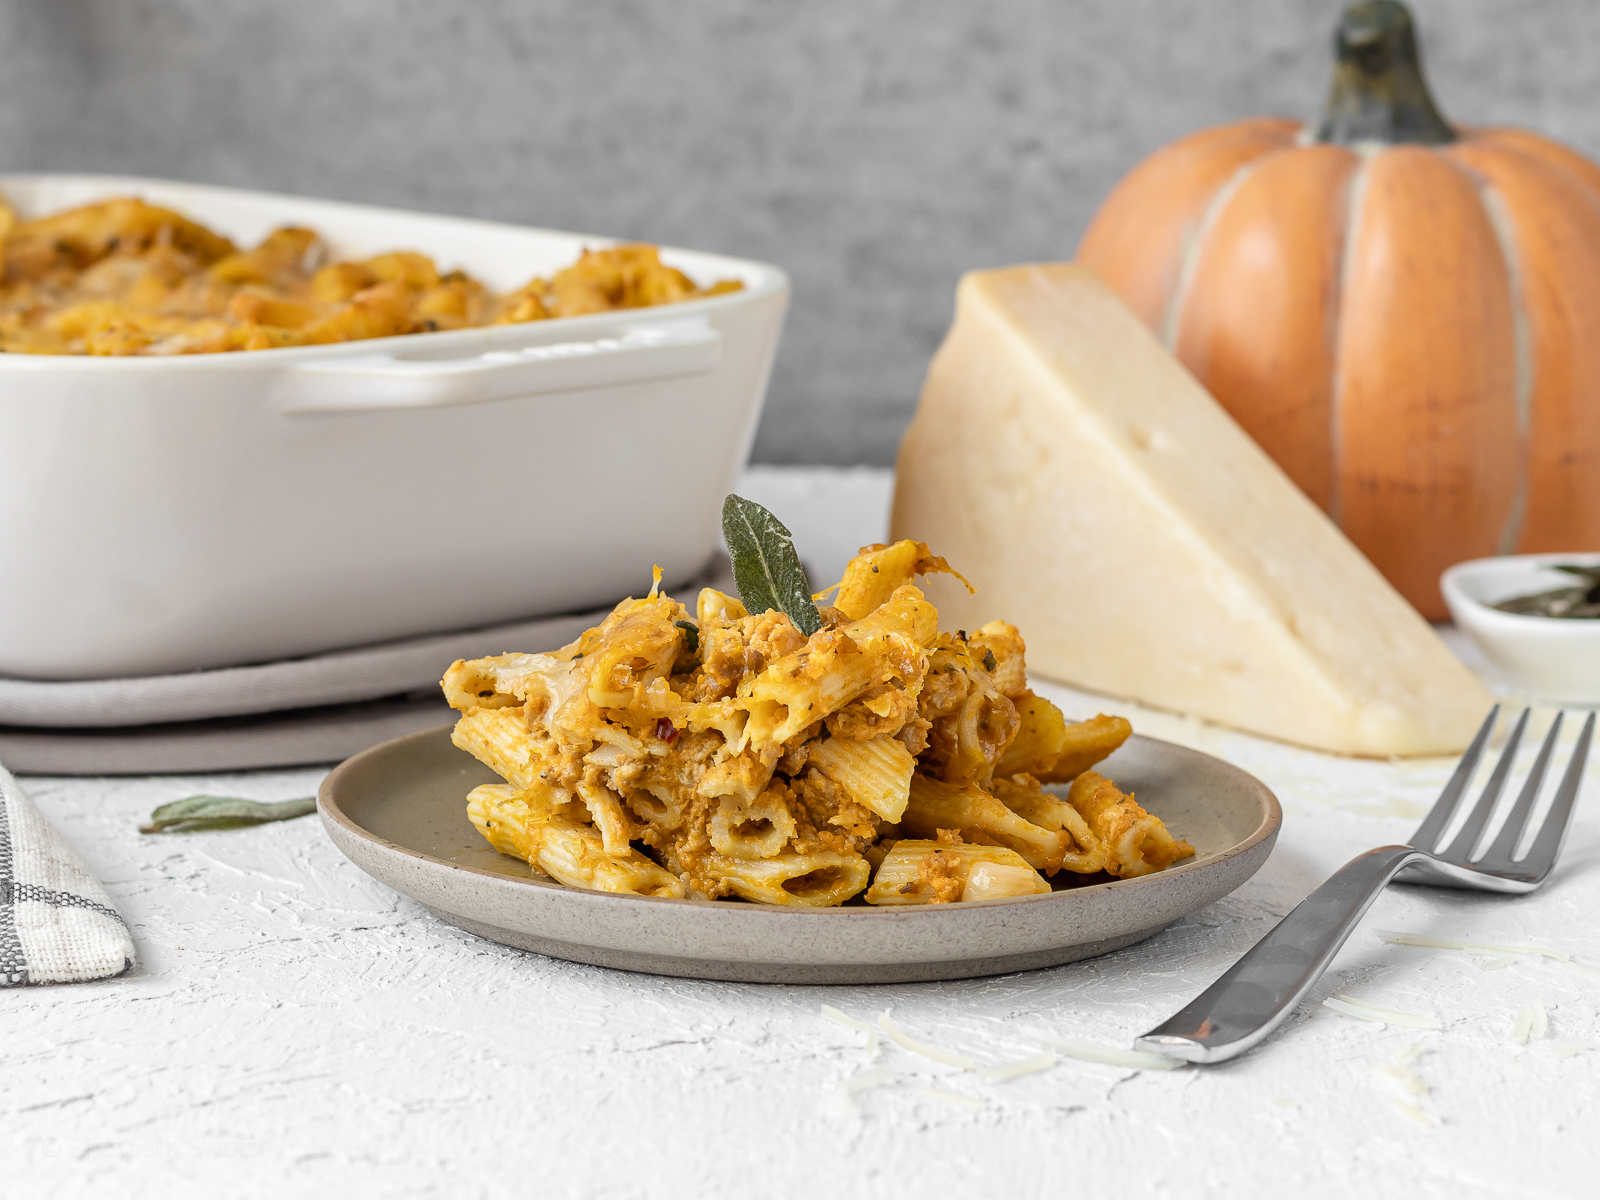 Plate of creamy pumpkin pasta topped with a fried sage leaf and parmesan cheese on the side with a baking dish filled with more pasta in the background.